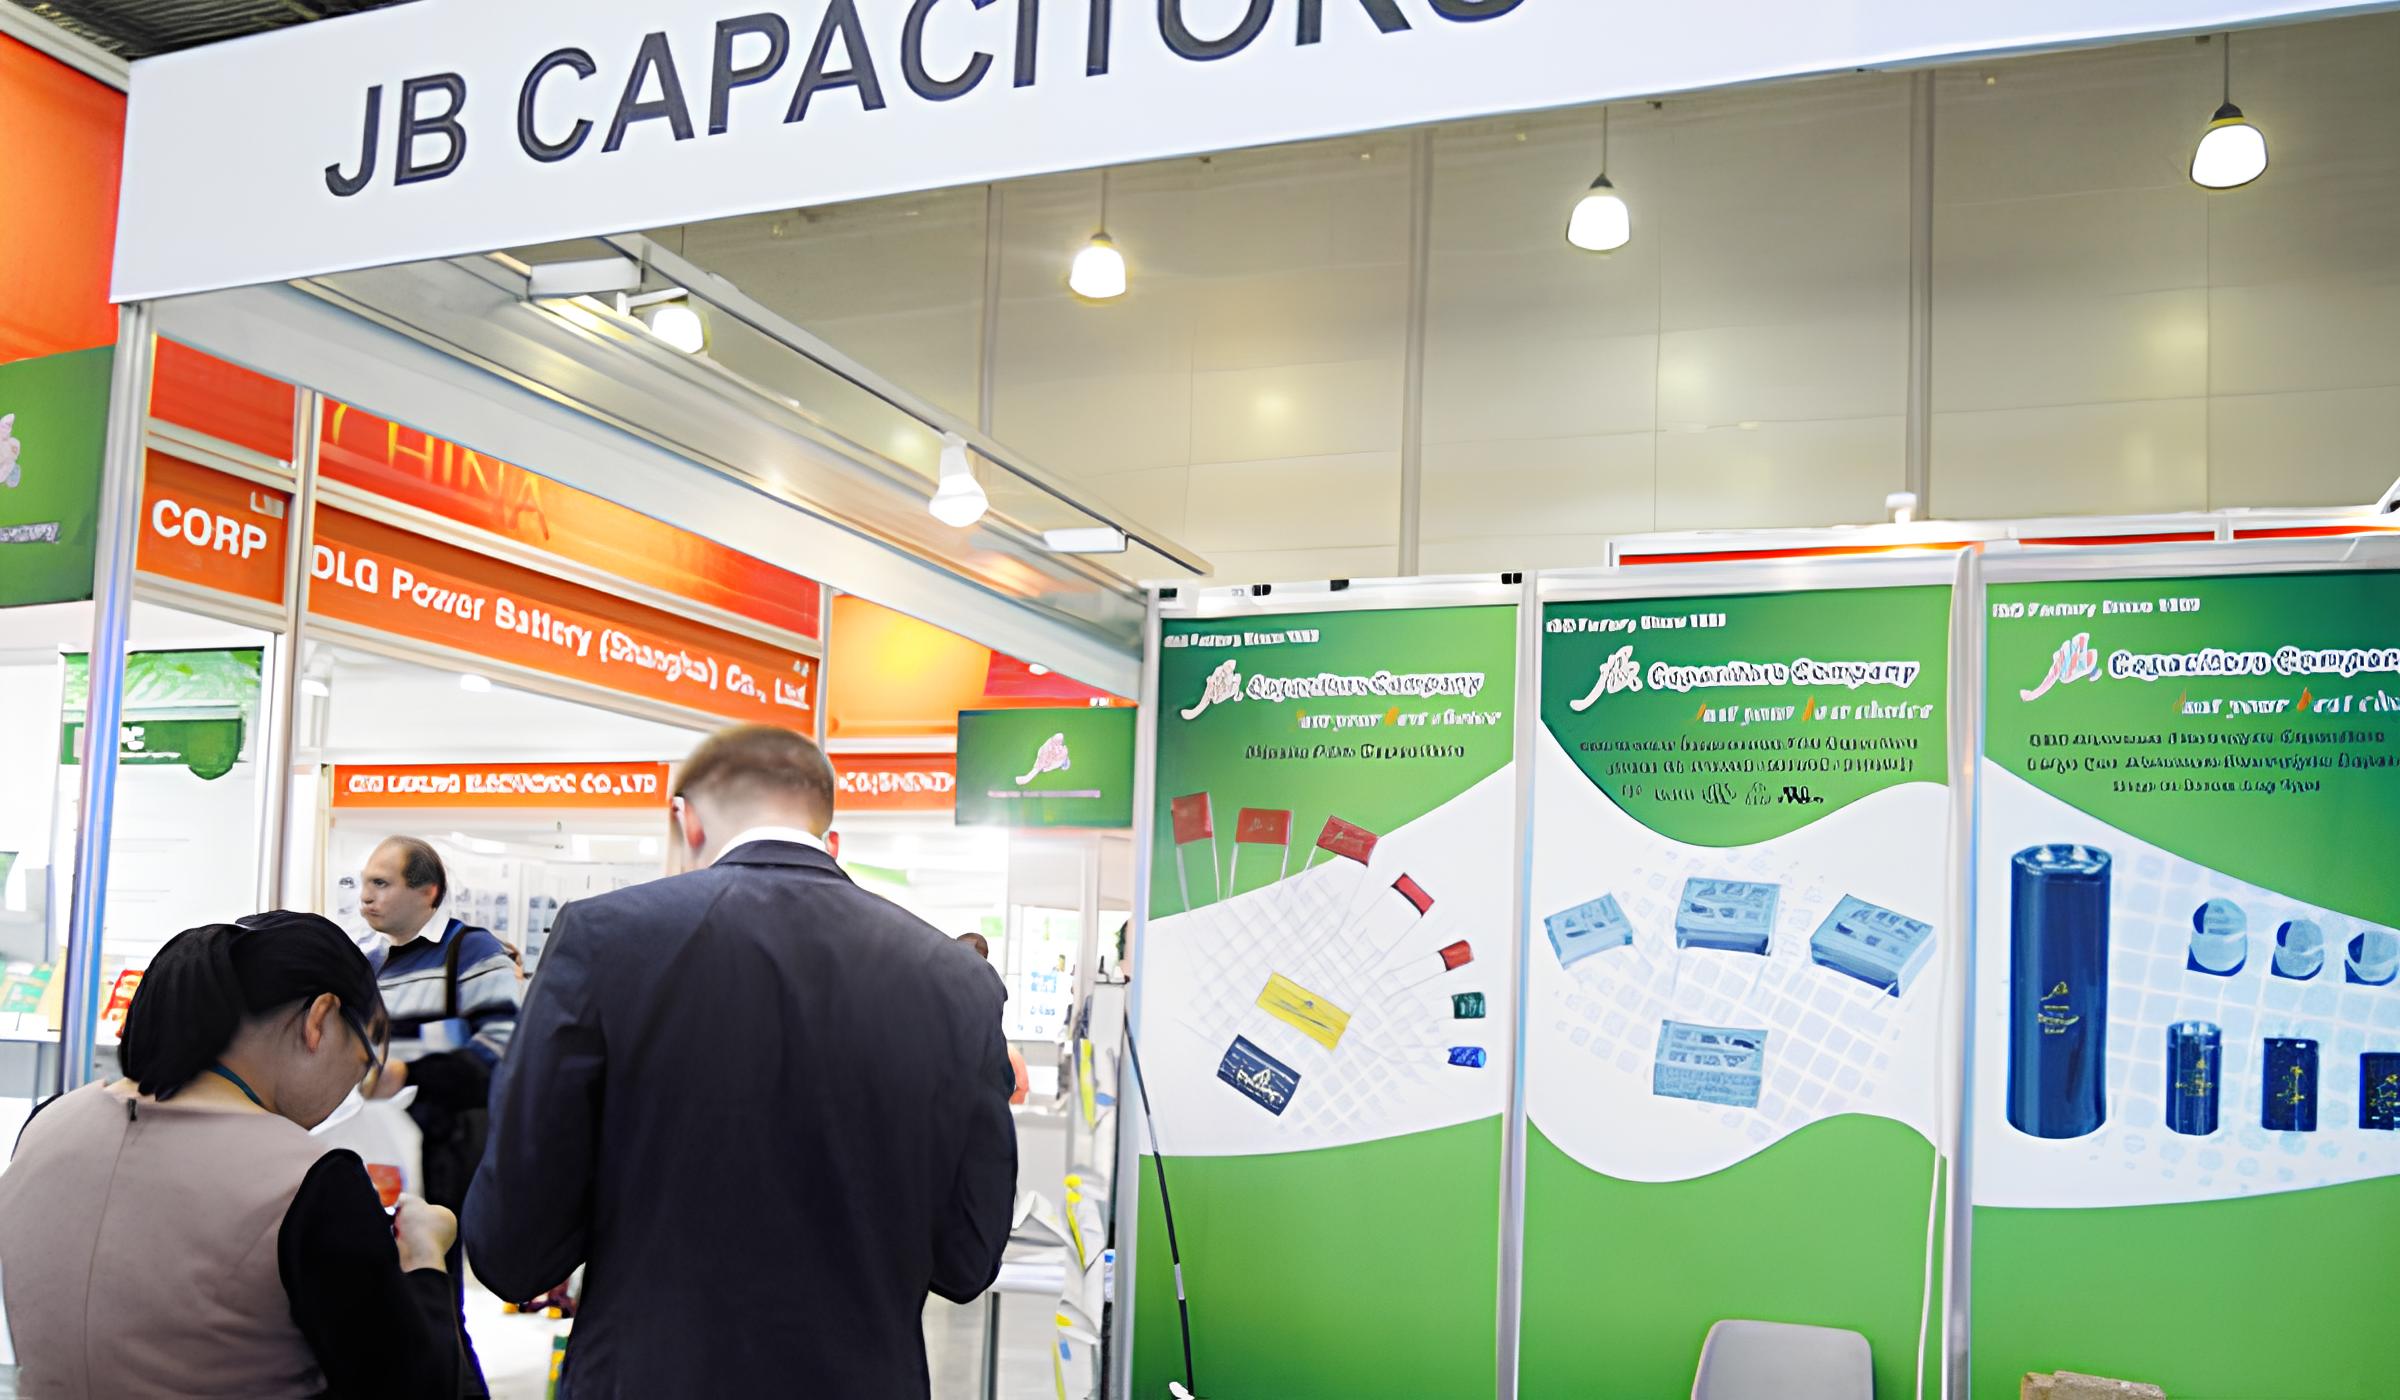 jb - Electronica 2013 in Russia, jb Booth No.: Hall 3, L40.